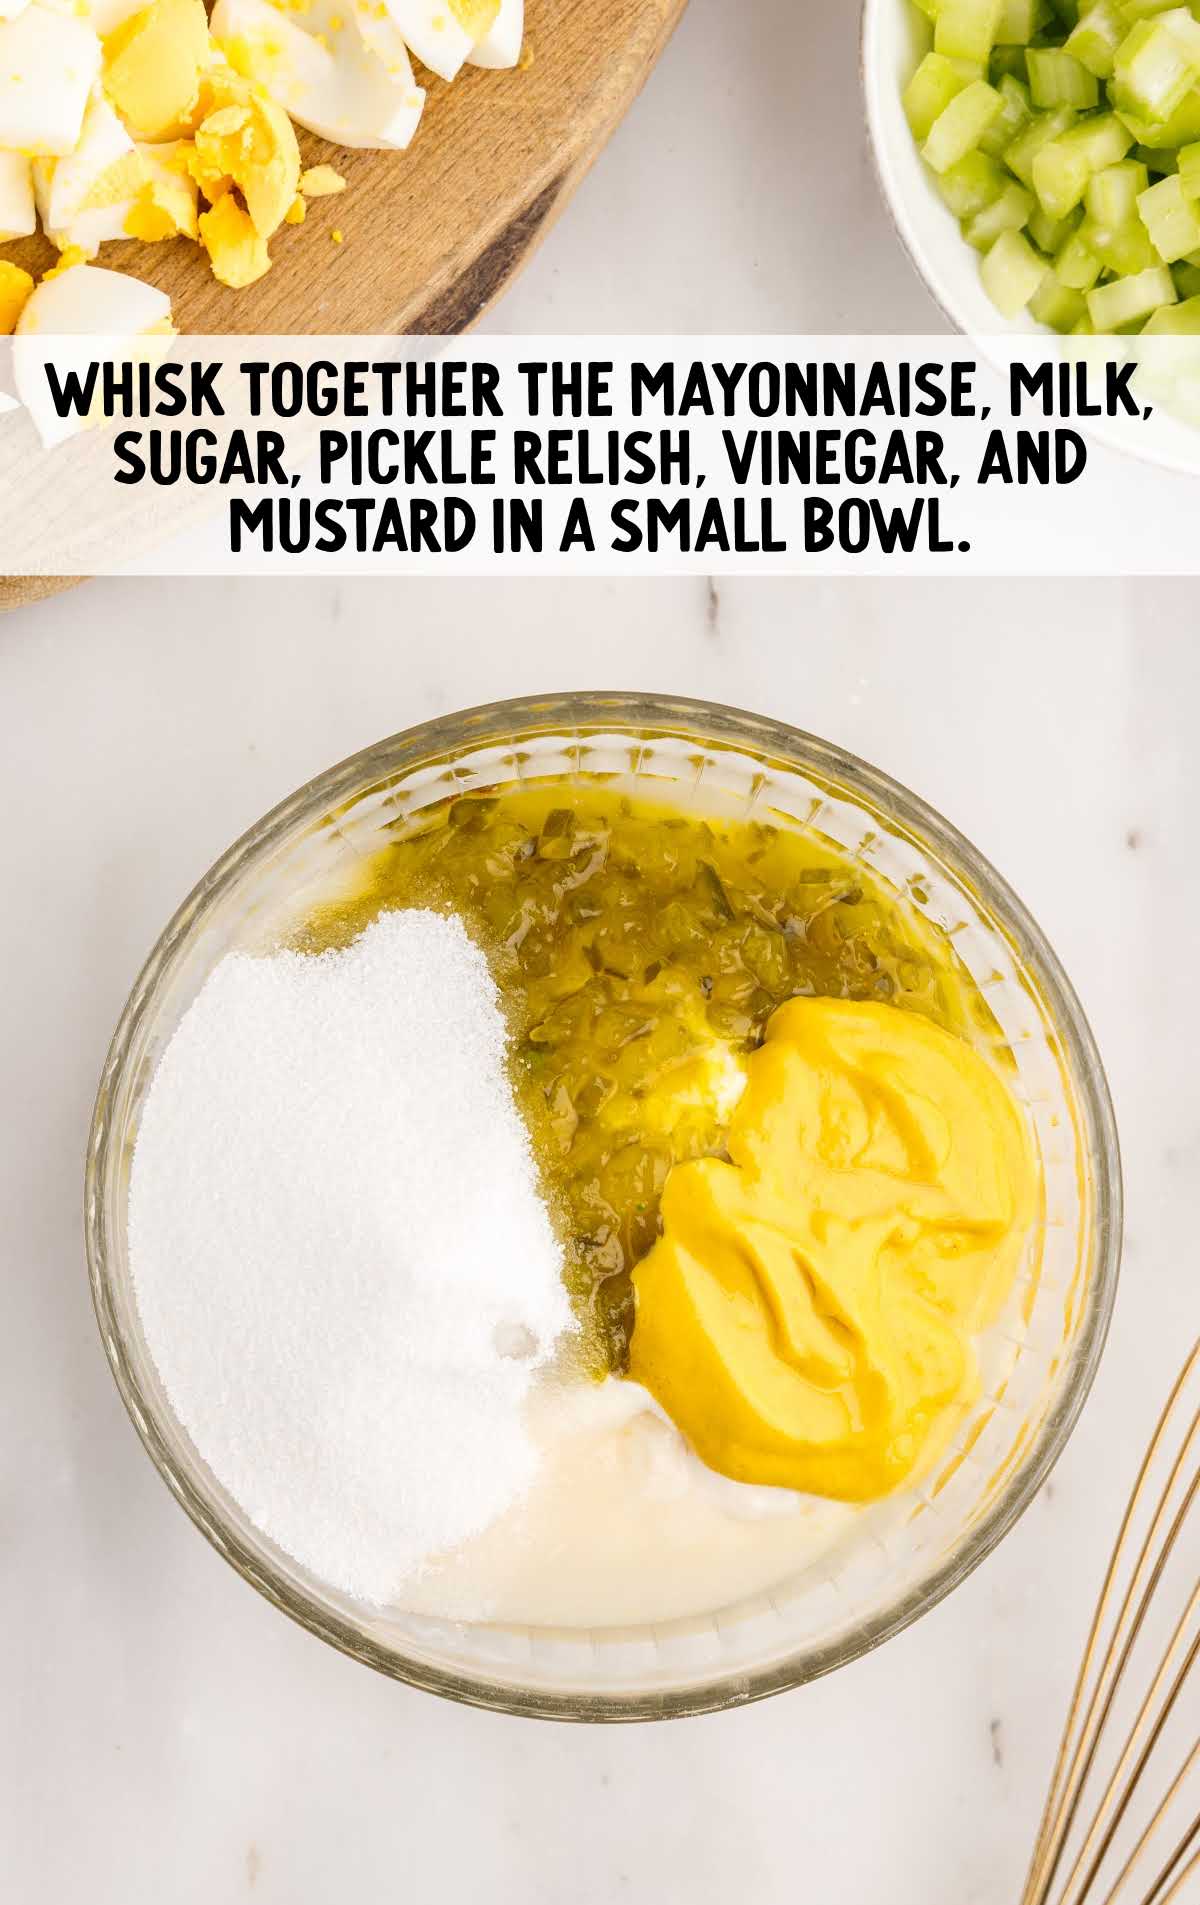 mayonnaise, milk, sugar, pickle relish, vinegar, and mustard combined in a bowl